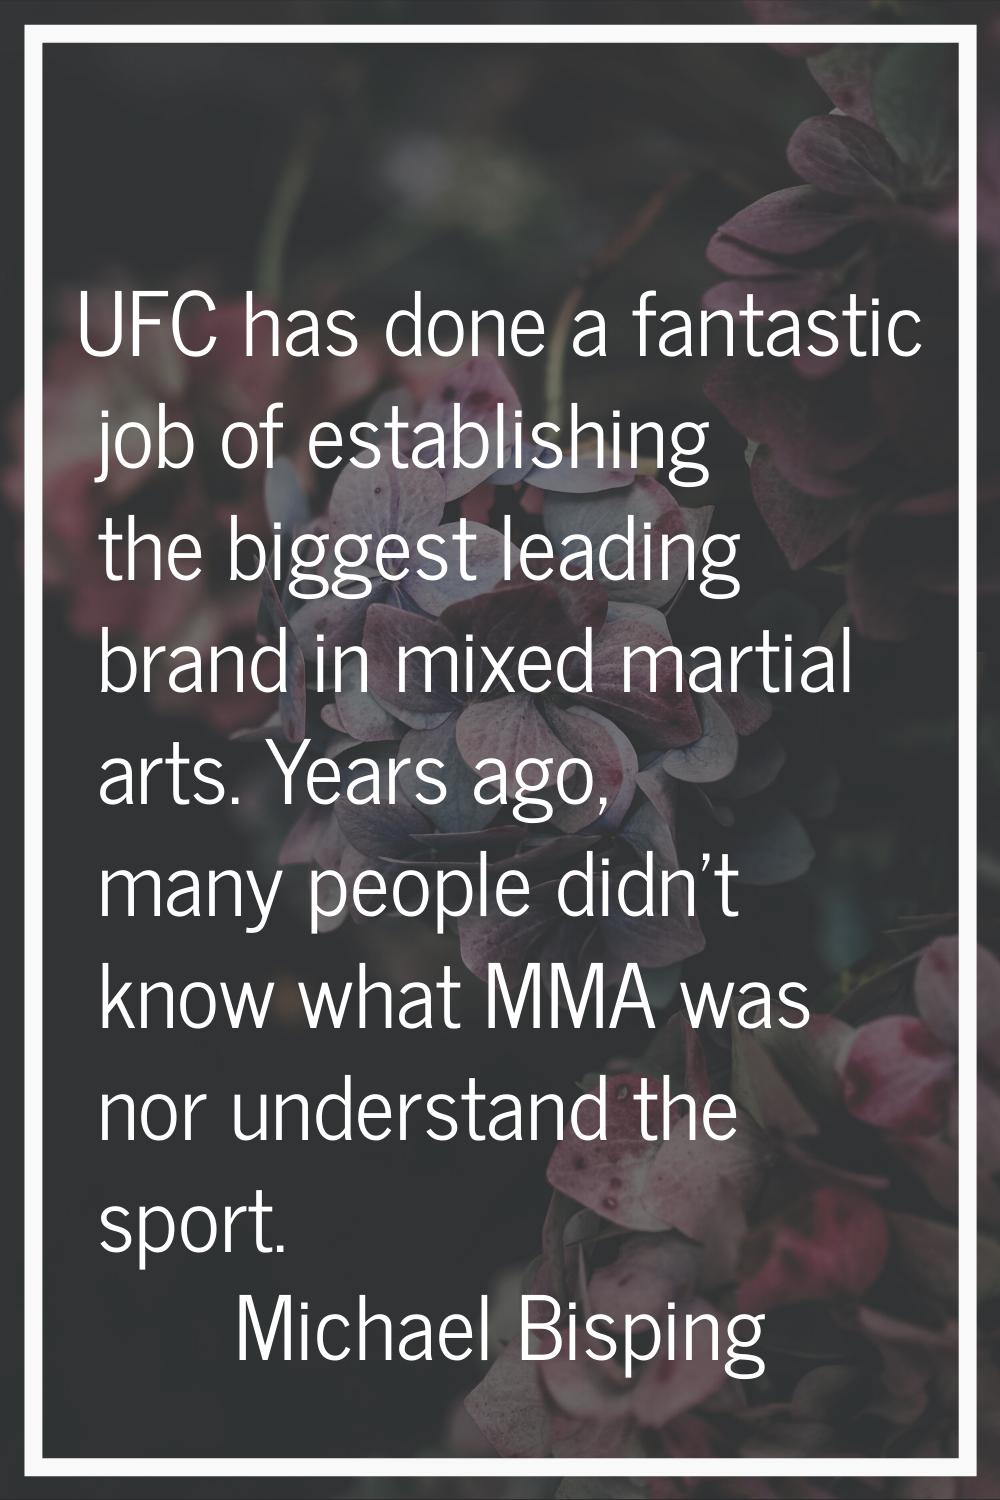 UFC has done a fantastic job of establishing the biggest leading brand in mixed martial arts. Years